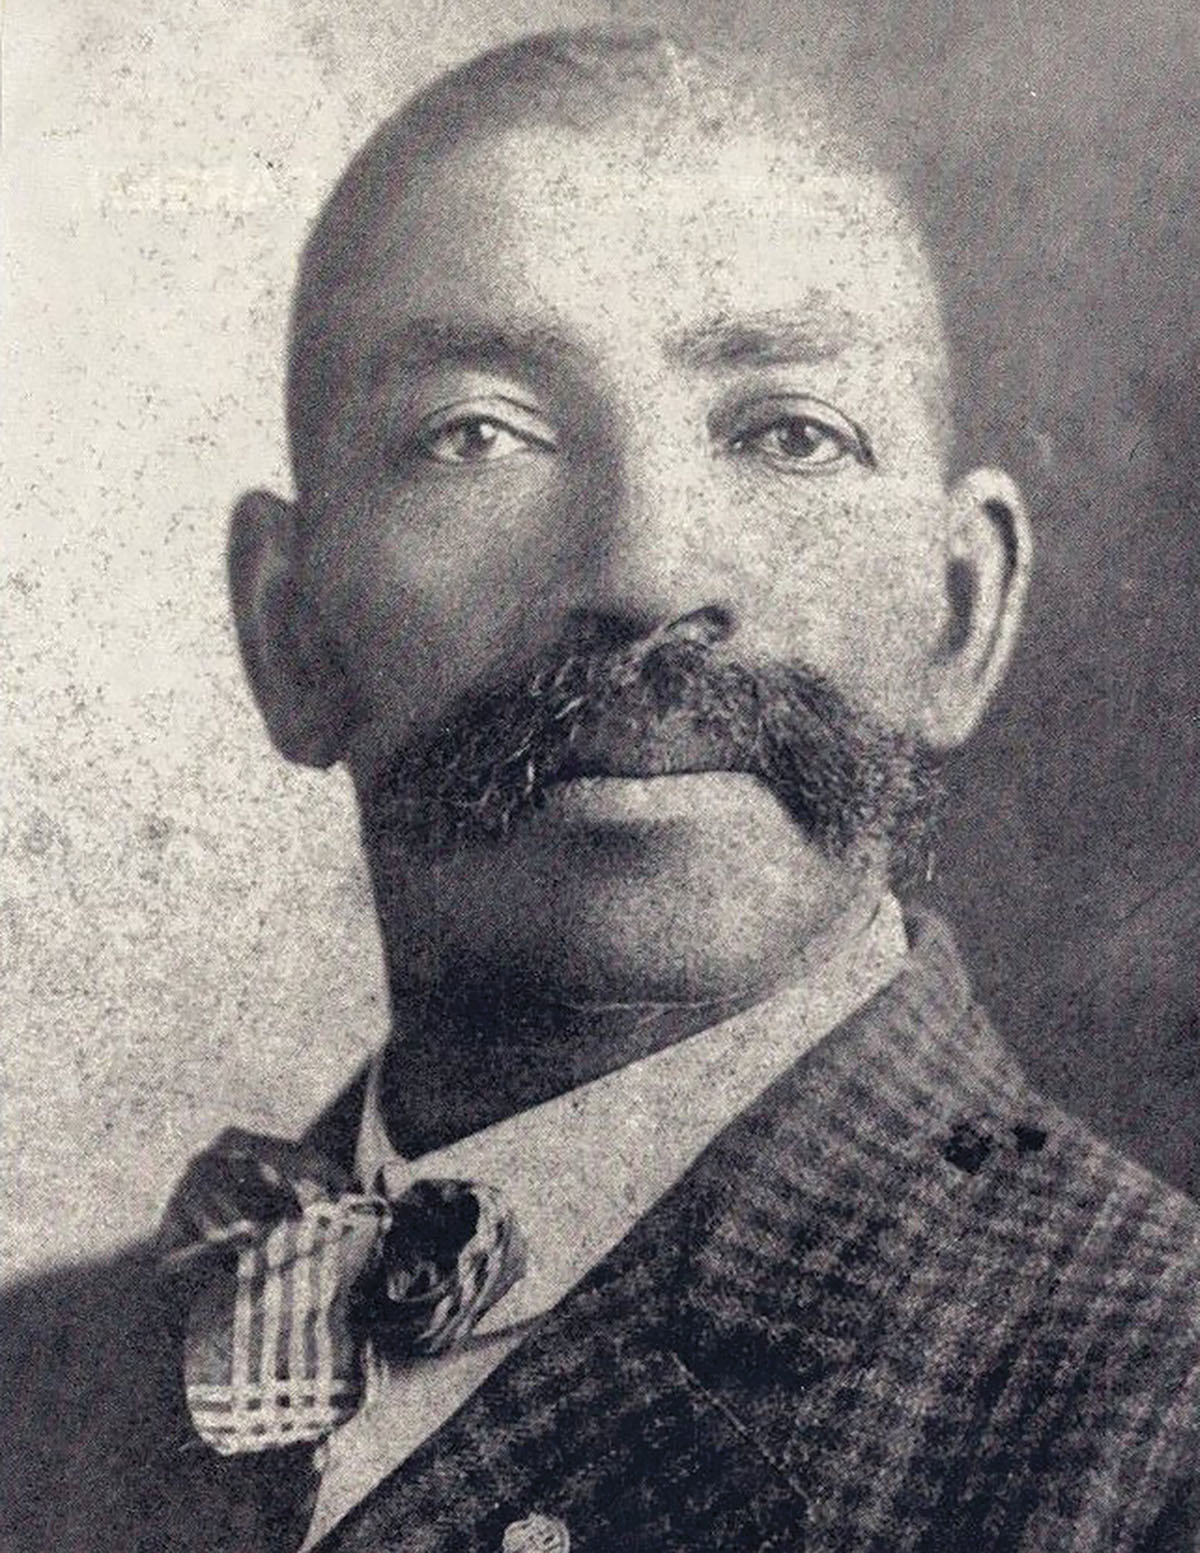 A historic photograph of a man wearing a checkered suit and bow tie